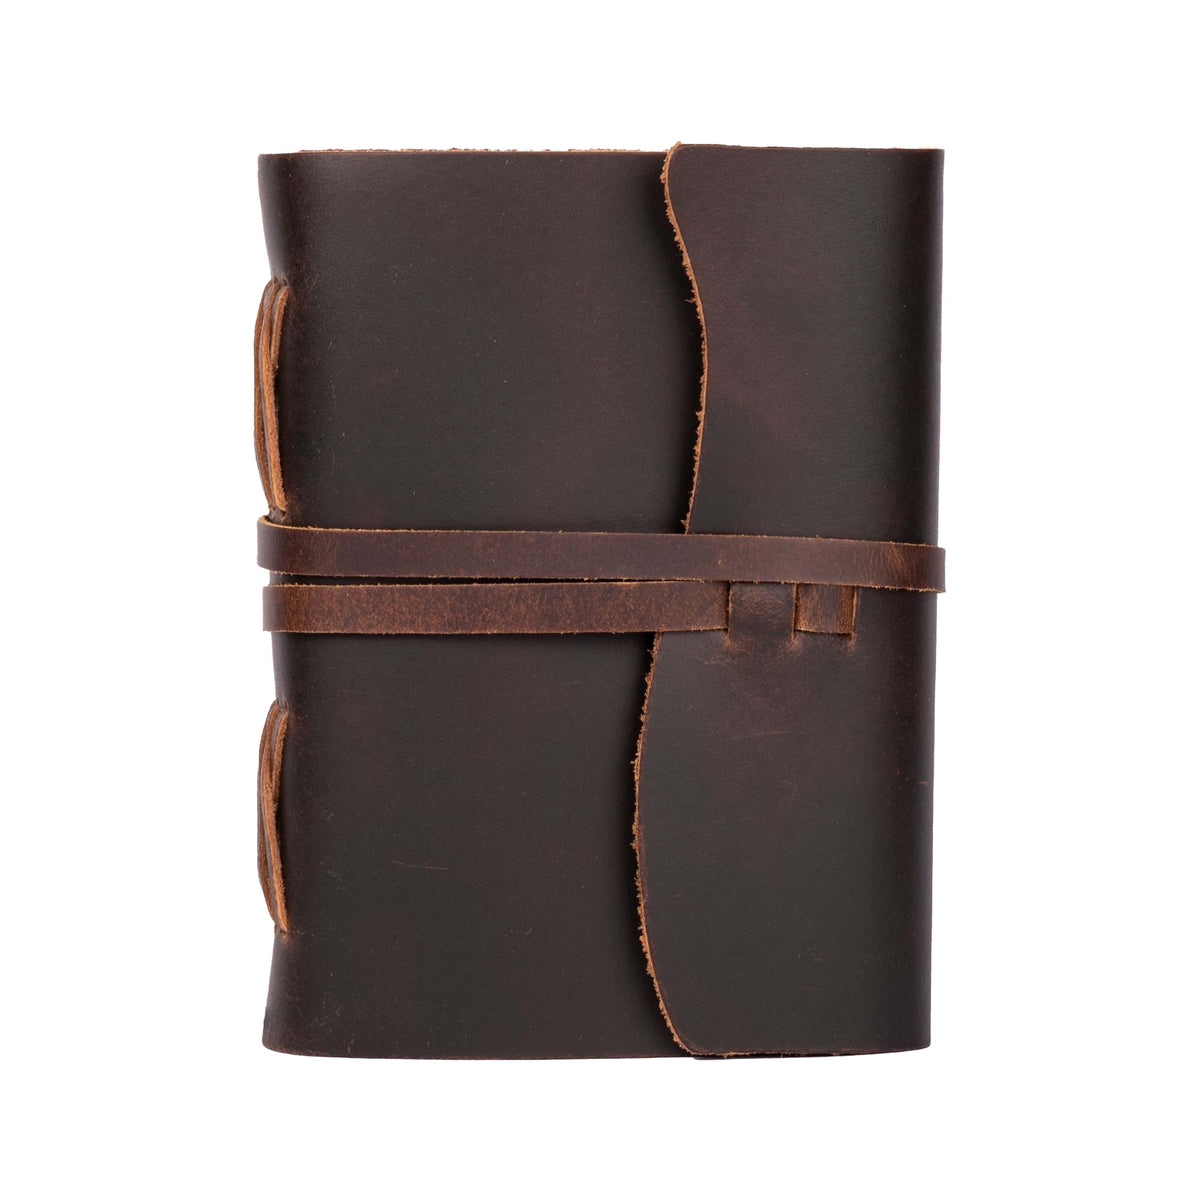 Chocolate Brown Color - Leather Bound Travel Journal Notebook Planner - Blank Paper - 220 Pages